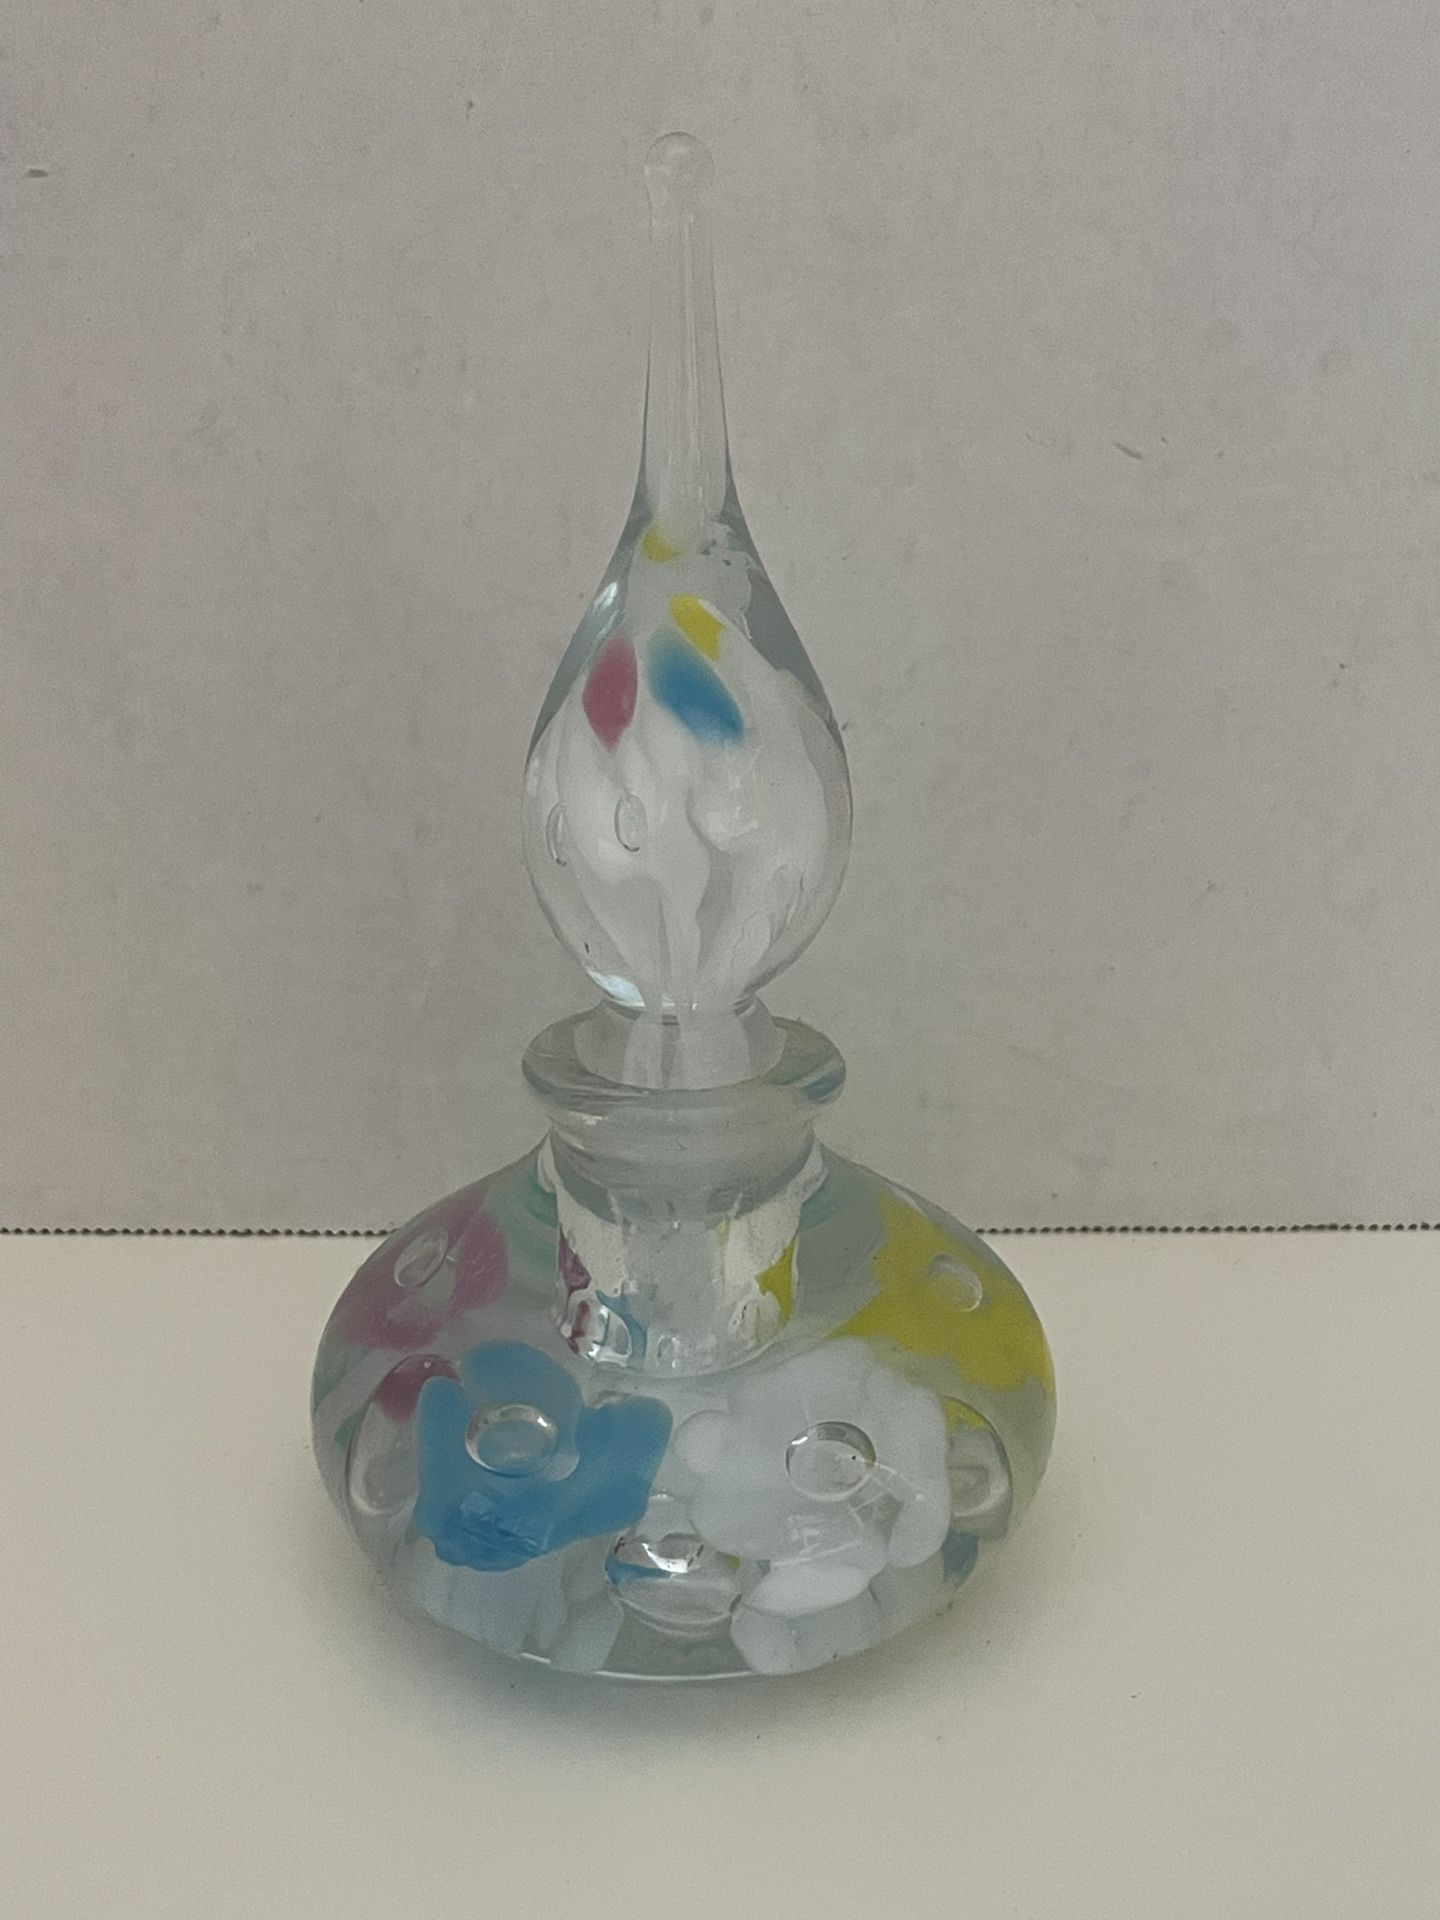 Unique Vintage Gibson Art Glass Floral Perfume Bottle, 2002, Never Used.